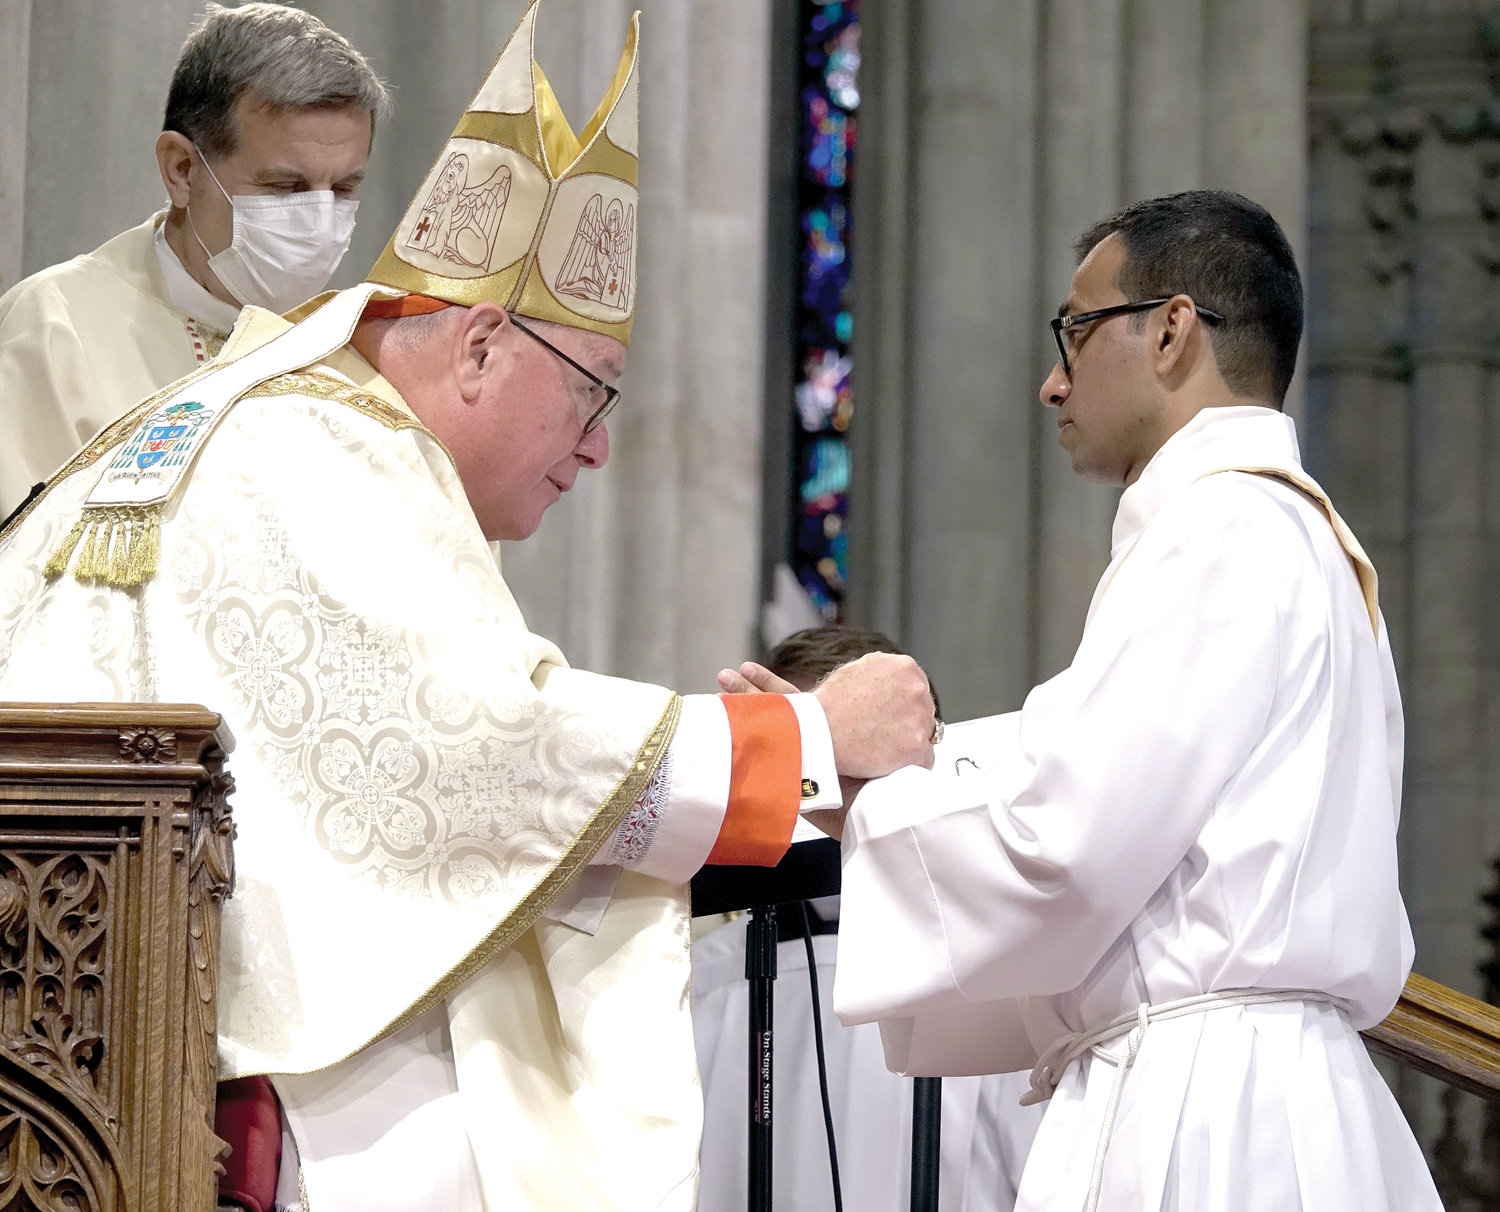 Cardinal Dolan served as principal celebrant at the Mass of Ordination of Priests June 26 at St. Patrick’s Cathedral. One of the new priests is Father Roland P. Pereira, M.Id., born in India and ordained for the Idente Missionaries.